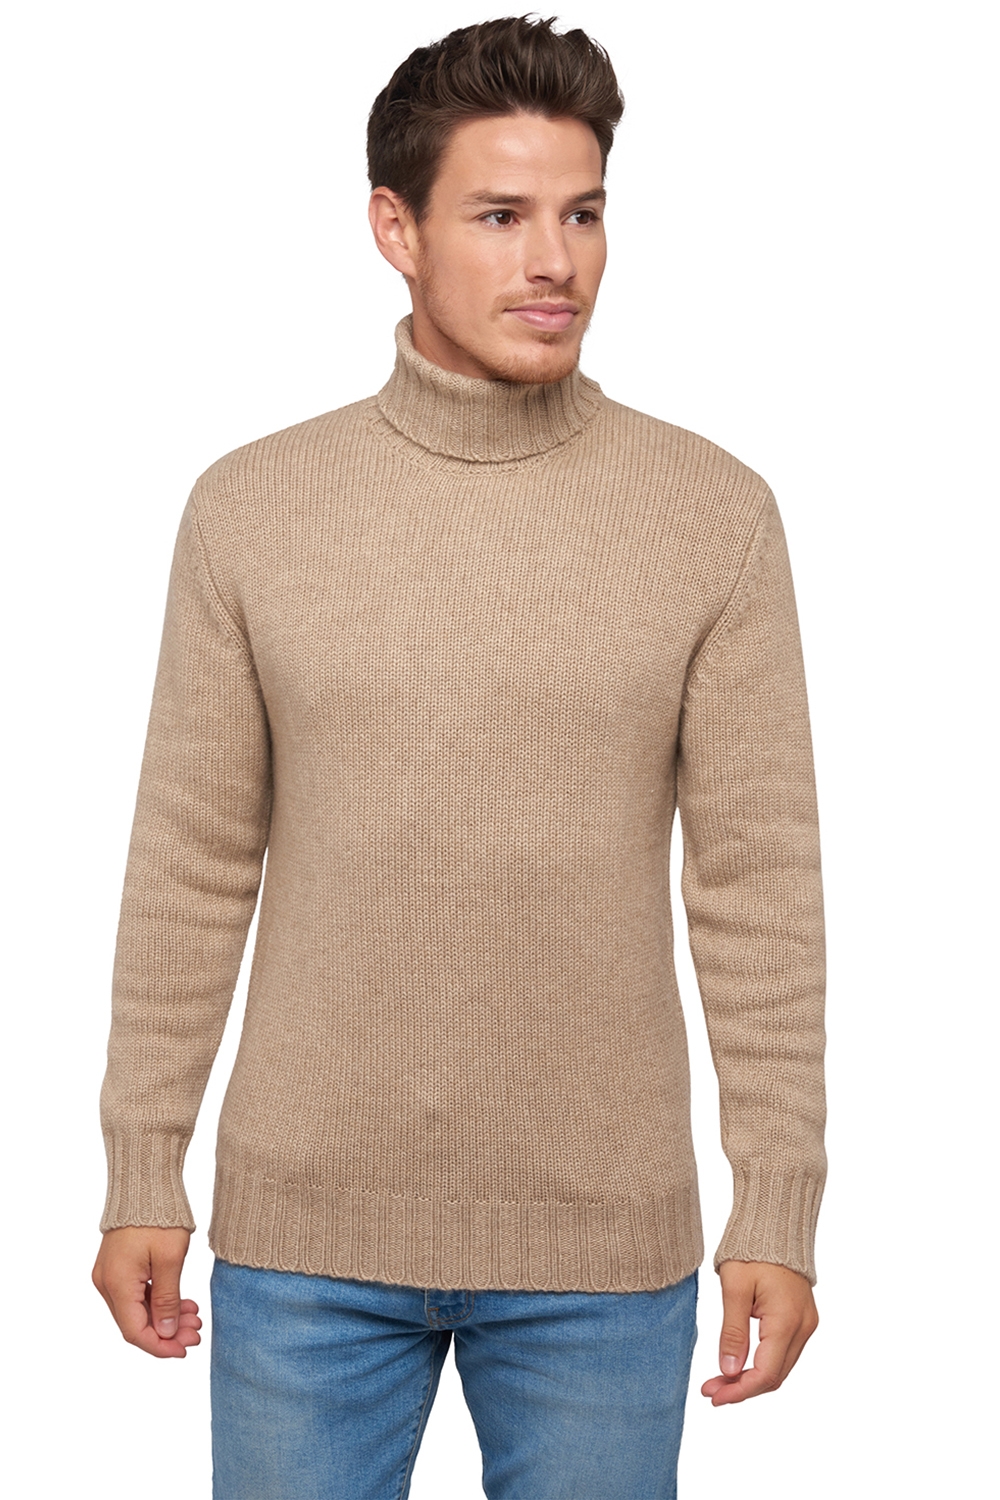 Cachemire Naturel pull homme natural chichi natural brown xs